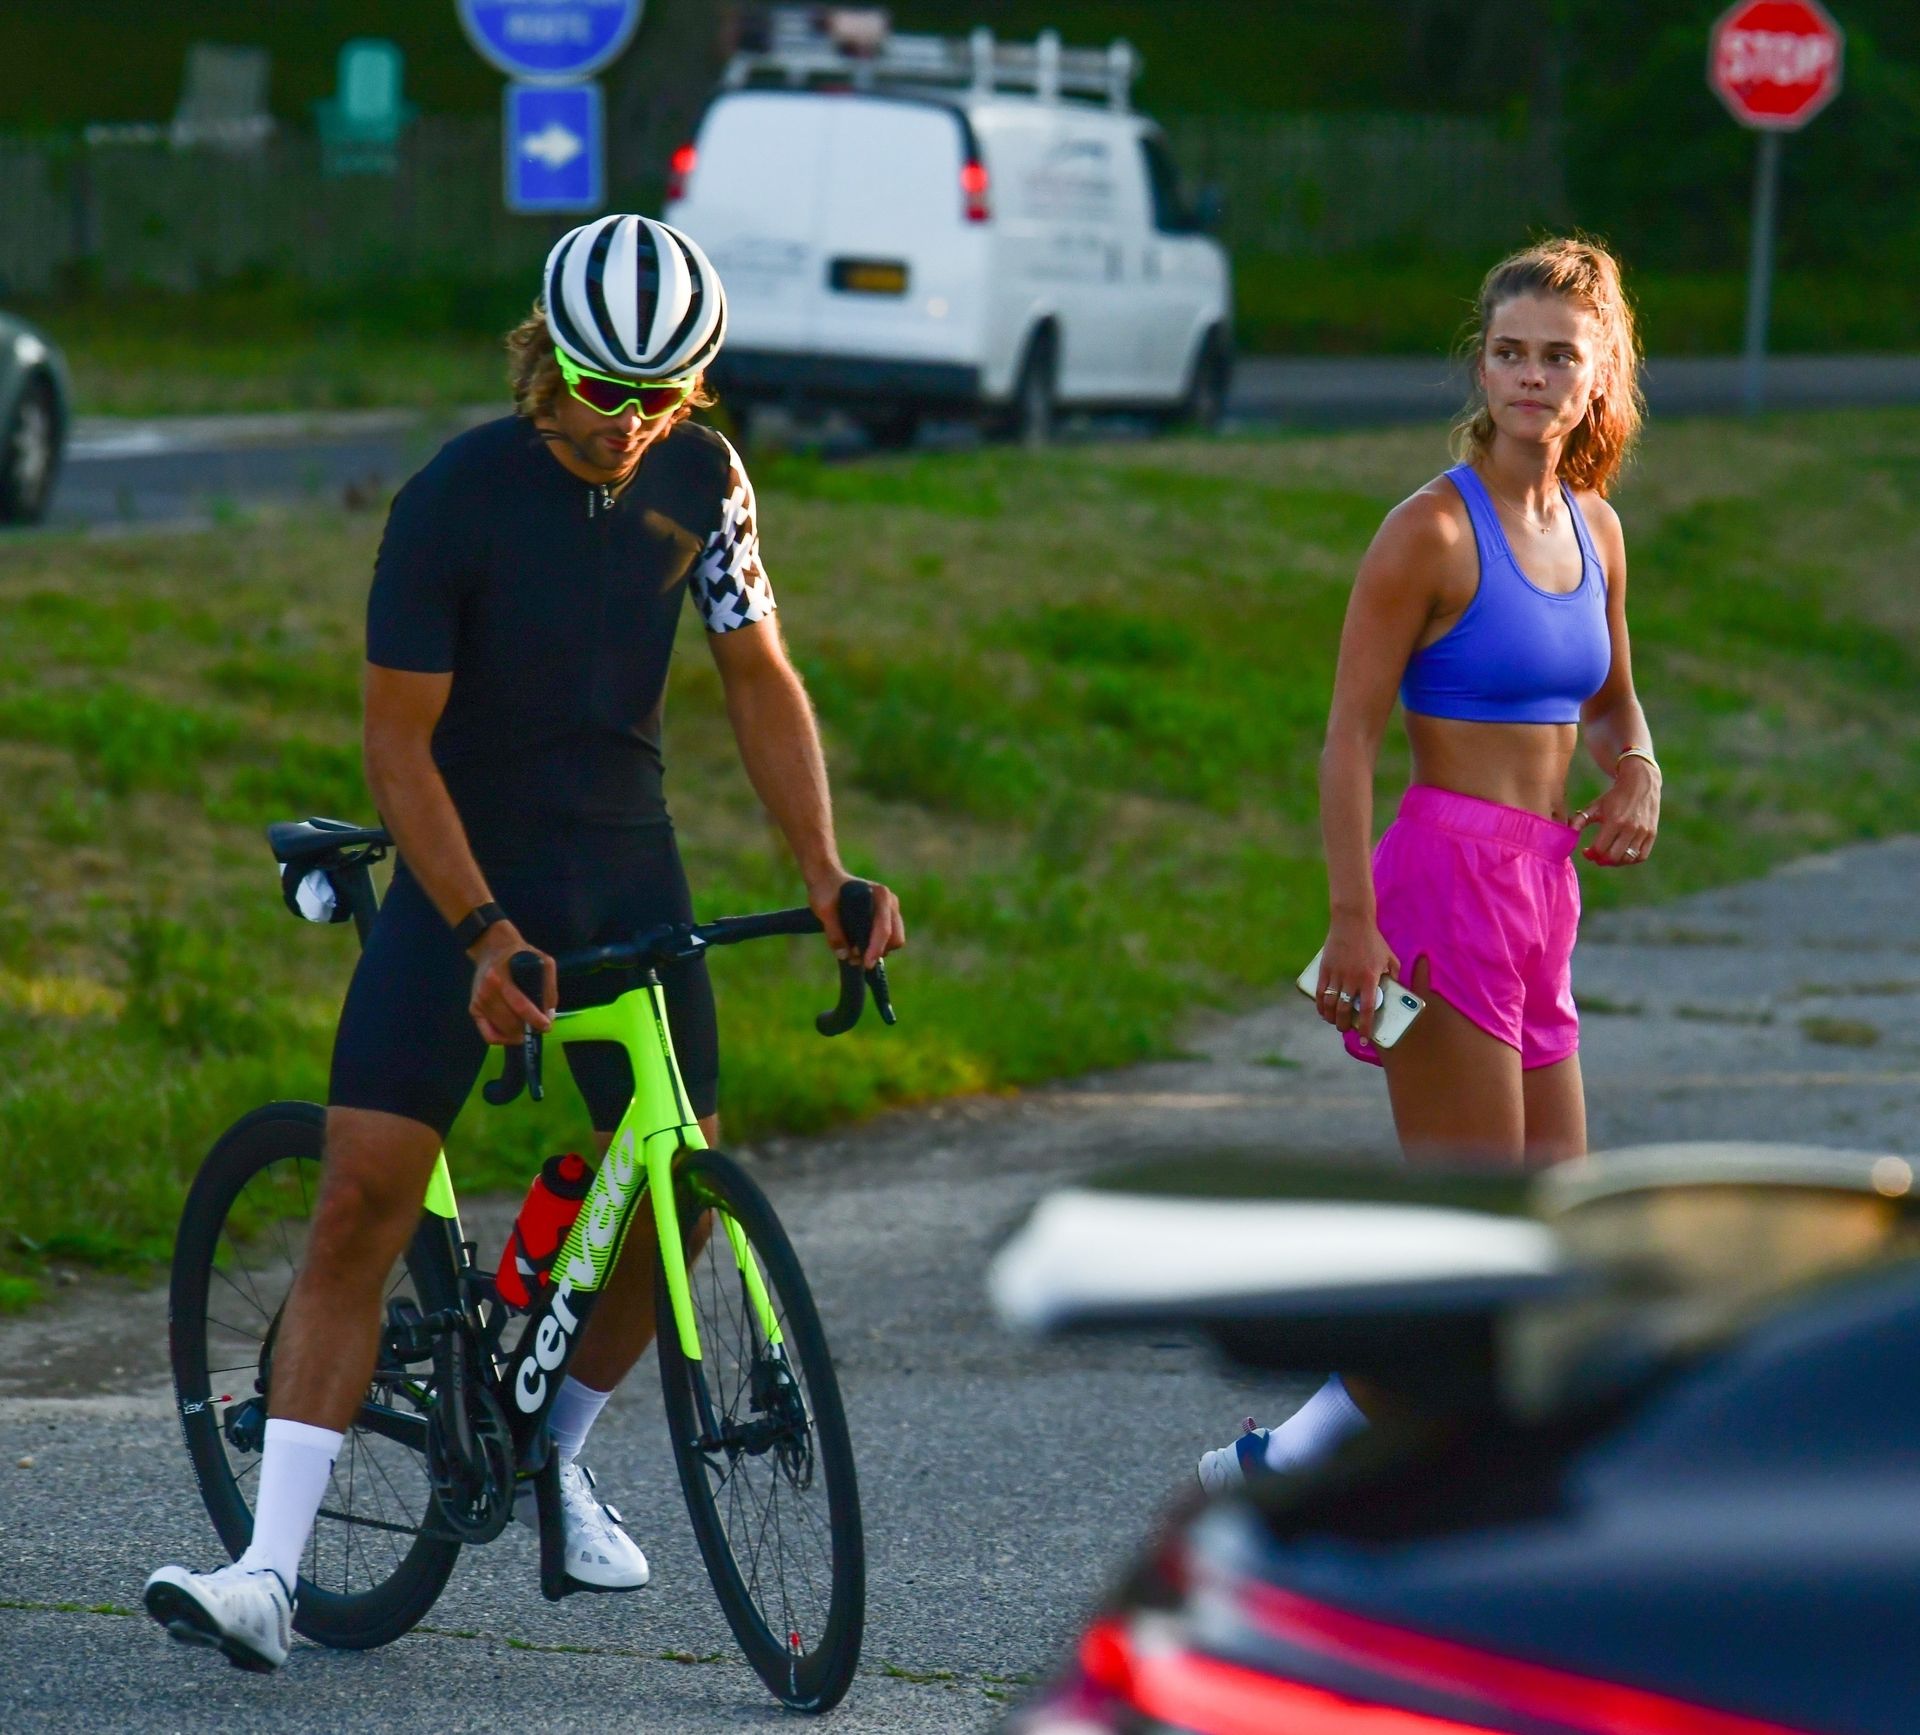 Nina Agdal & Jack Brinkley-Cook Chat After Their Work Out (Photos)